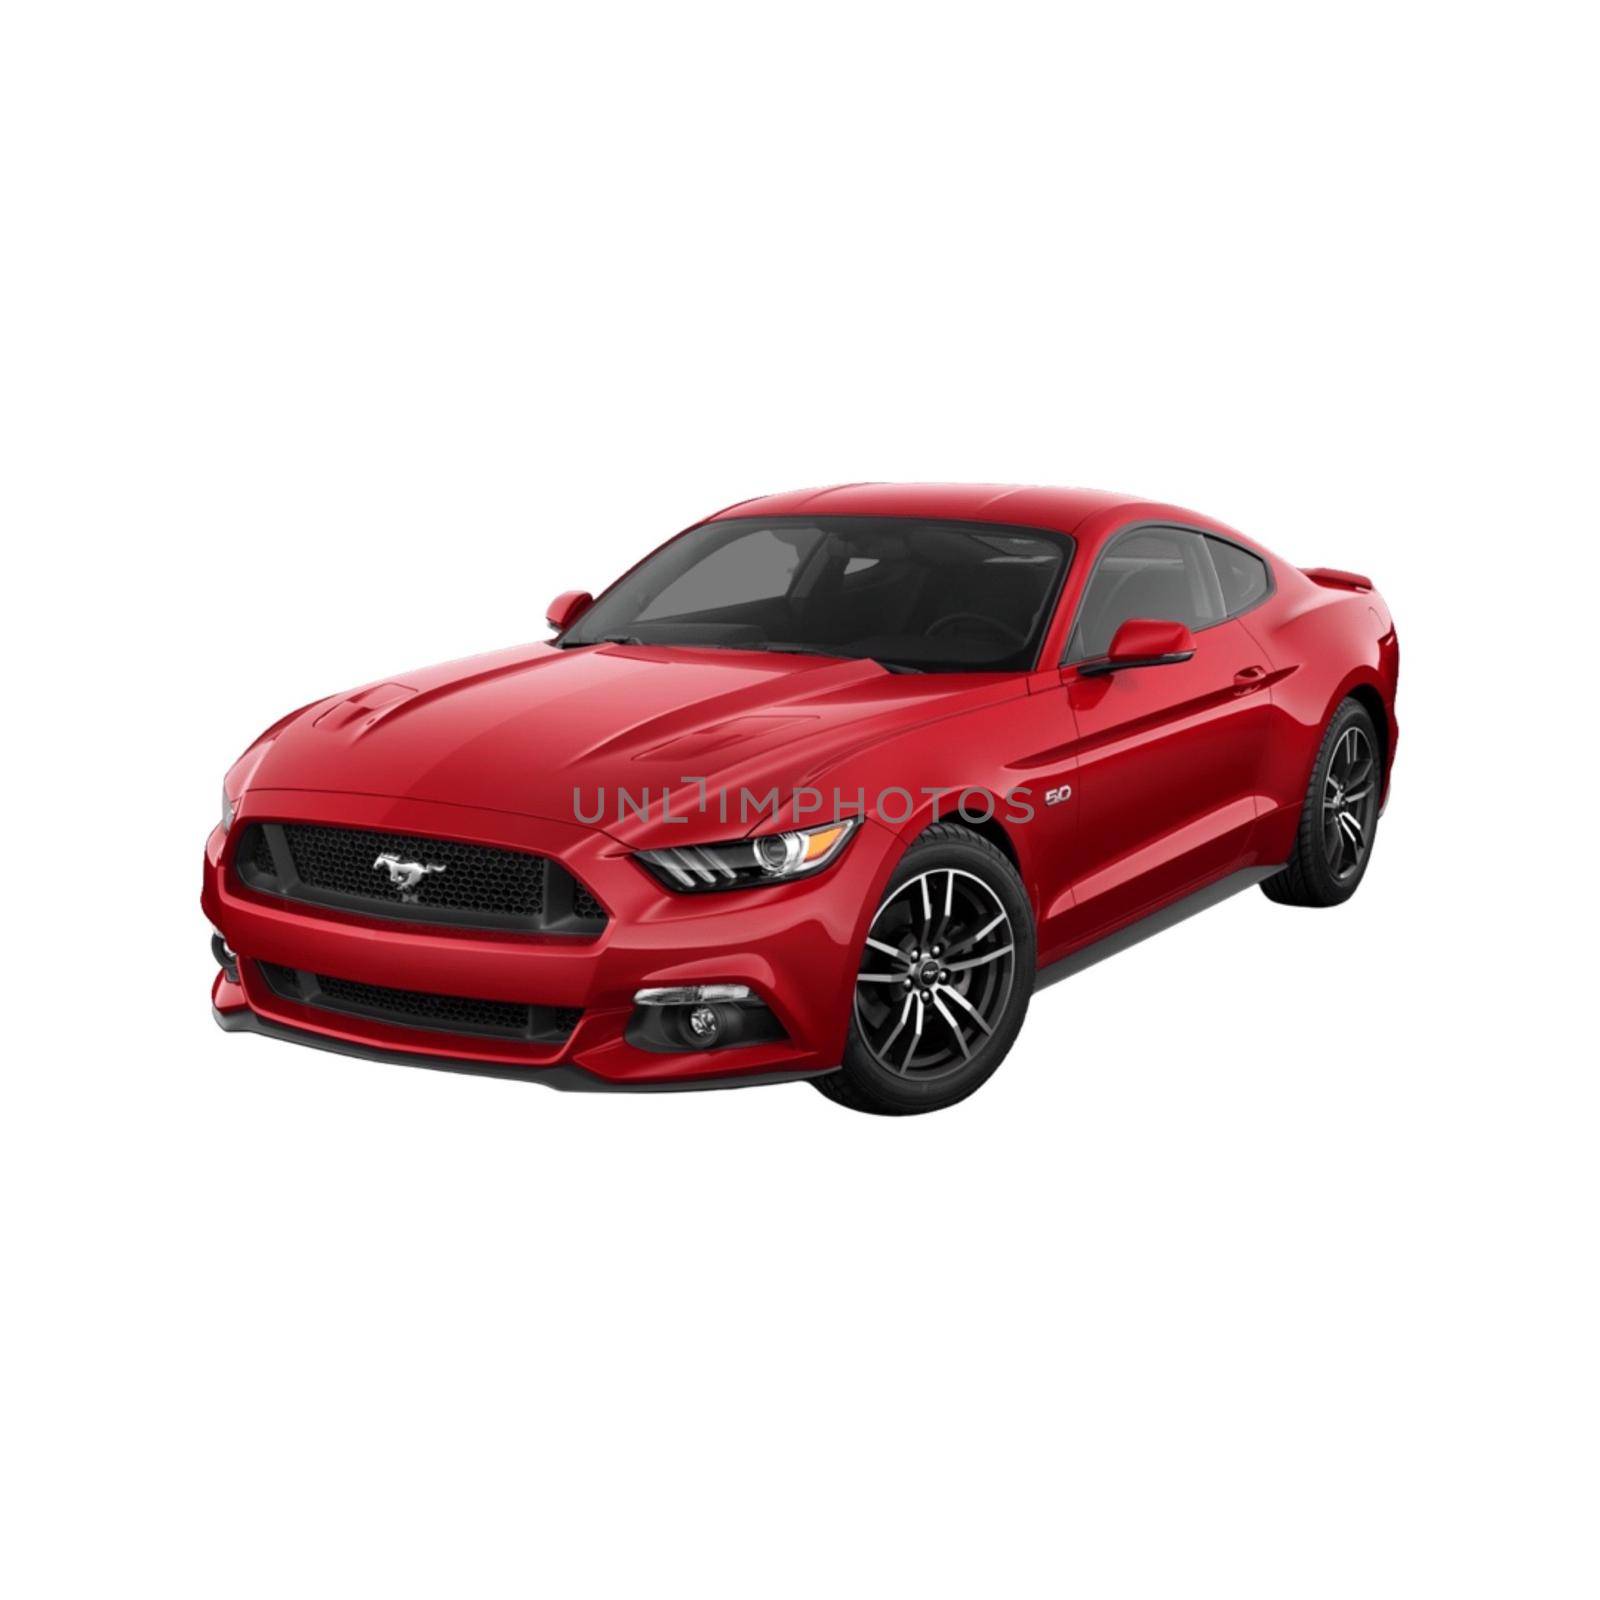 Isolated Picture of a Ford Mustang by FlyingDoctor